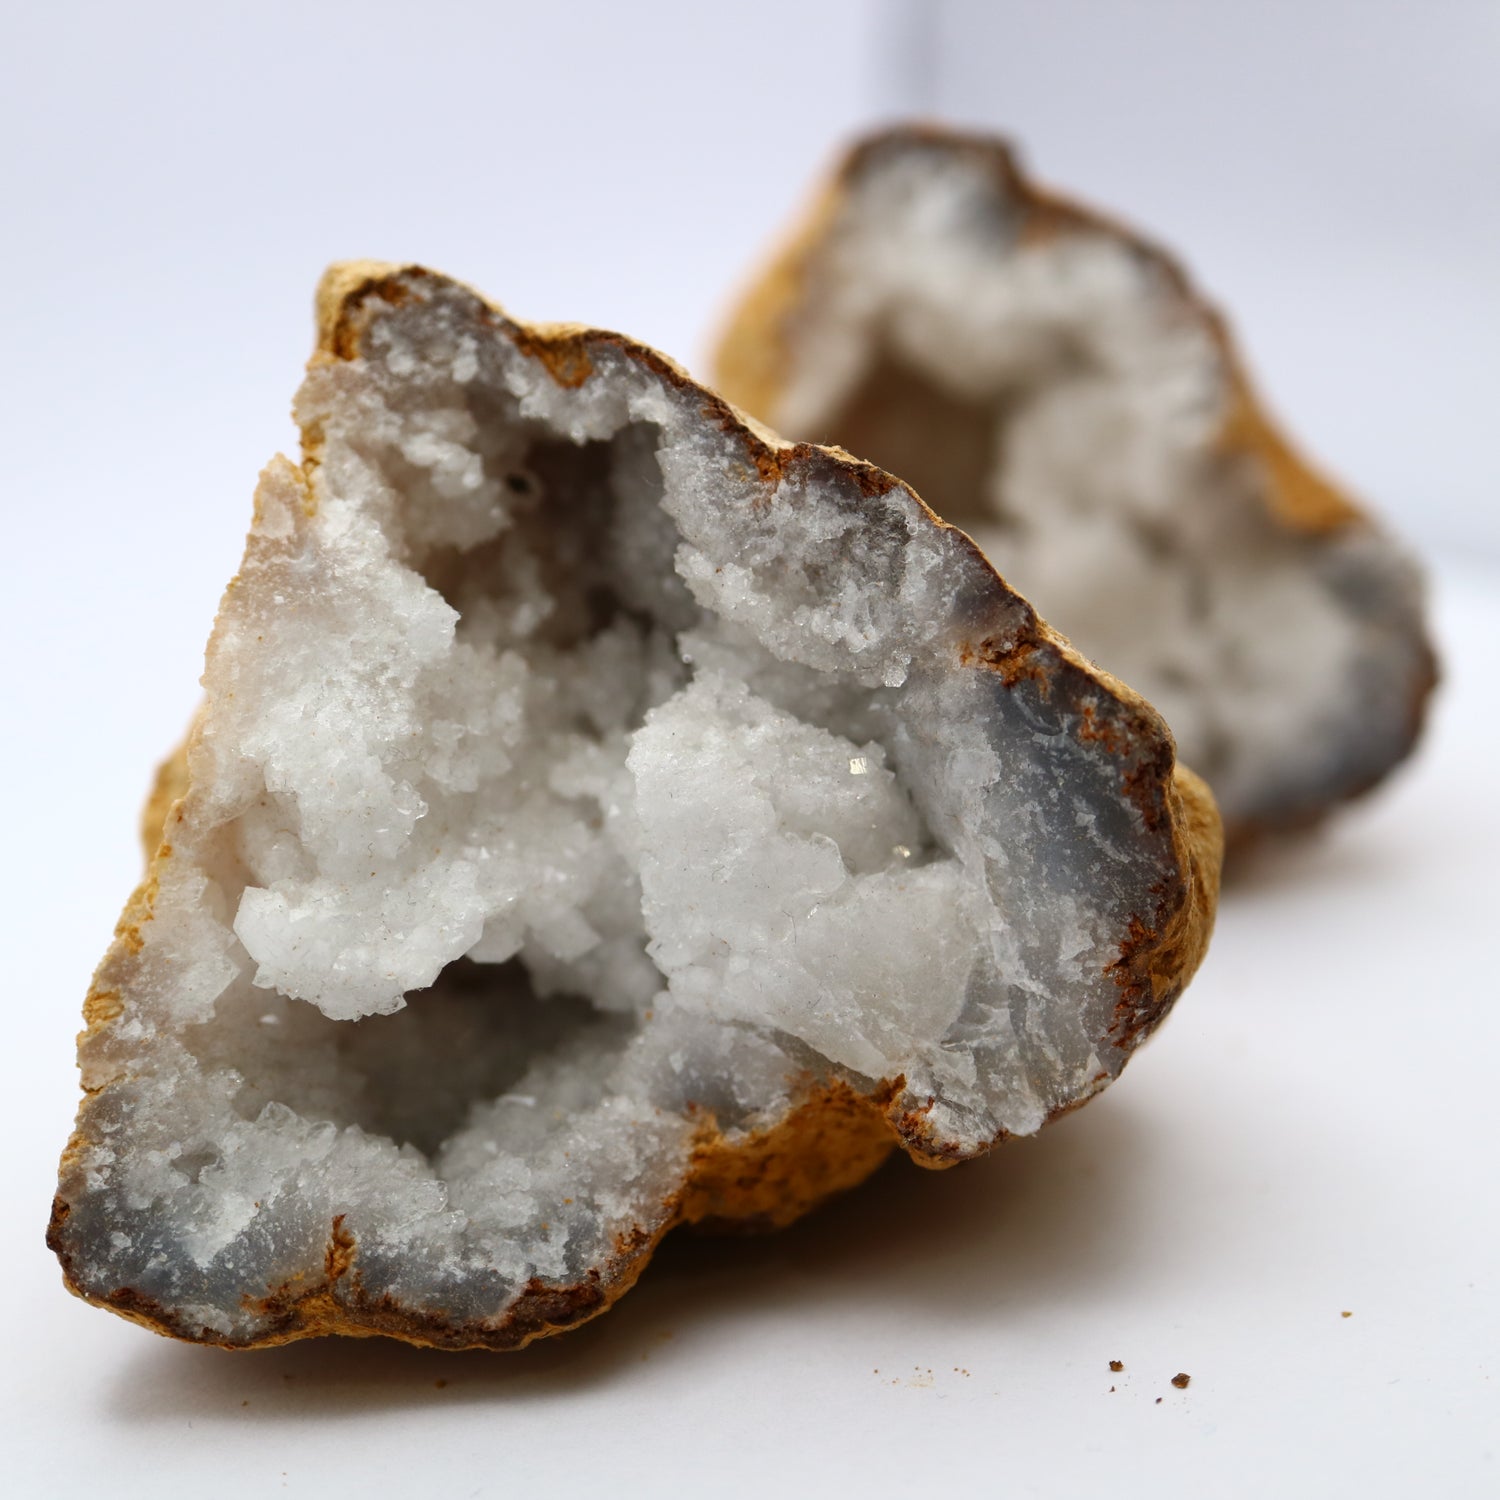 A geode crystal broken into two parts